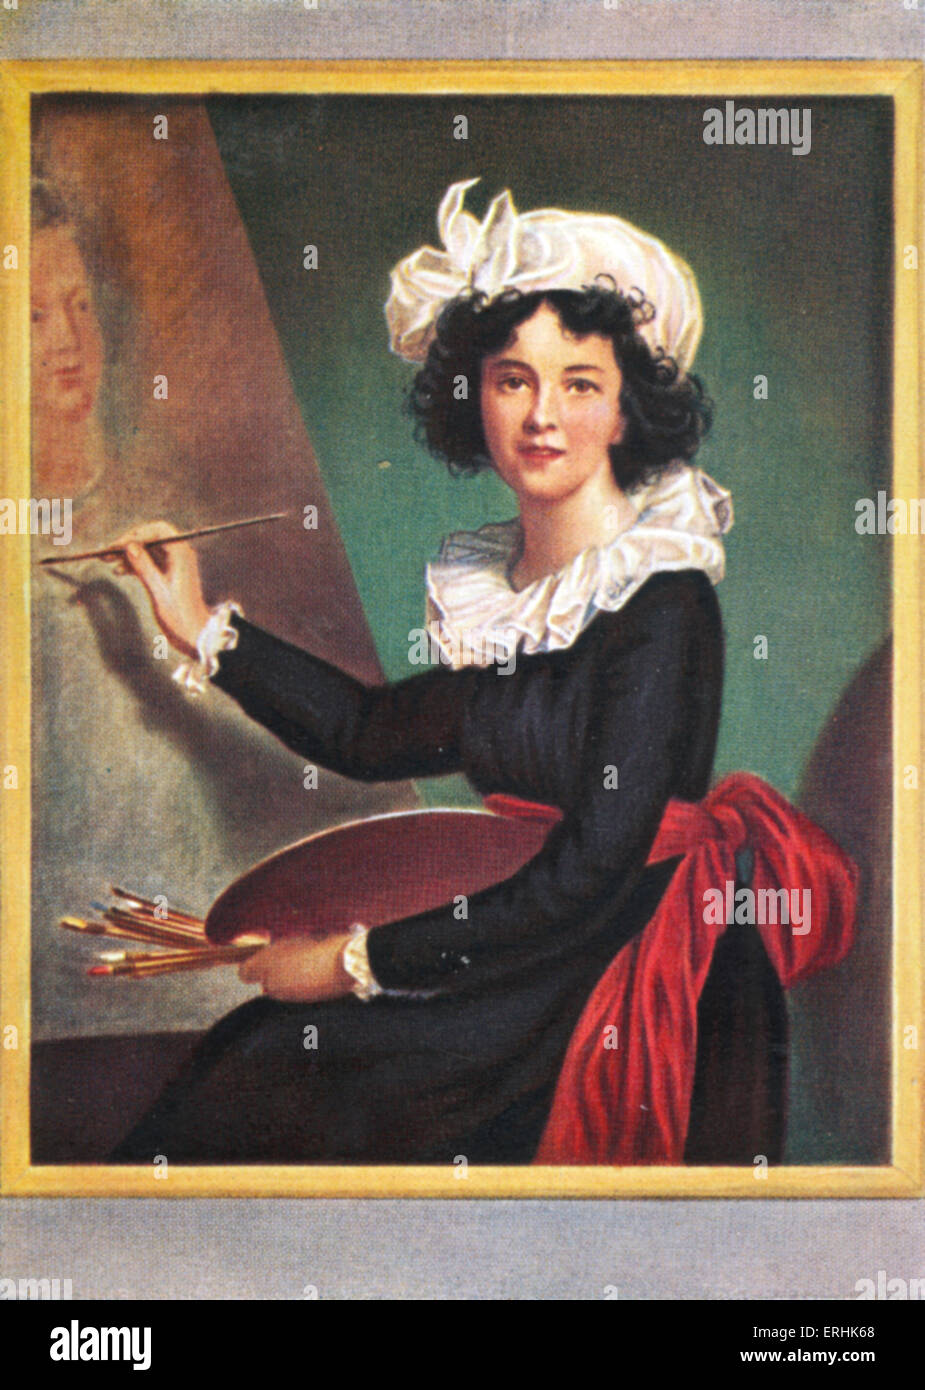 Élisabeth-Louise Vigée Le Brun. Portrait of the French painter. Posing with a paintbrush and canvas. After a miniature by Stock Photo